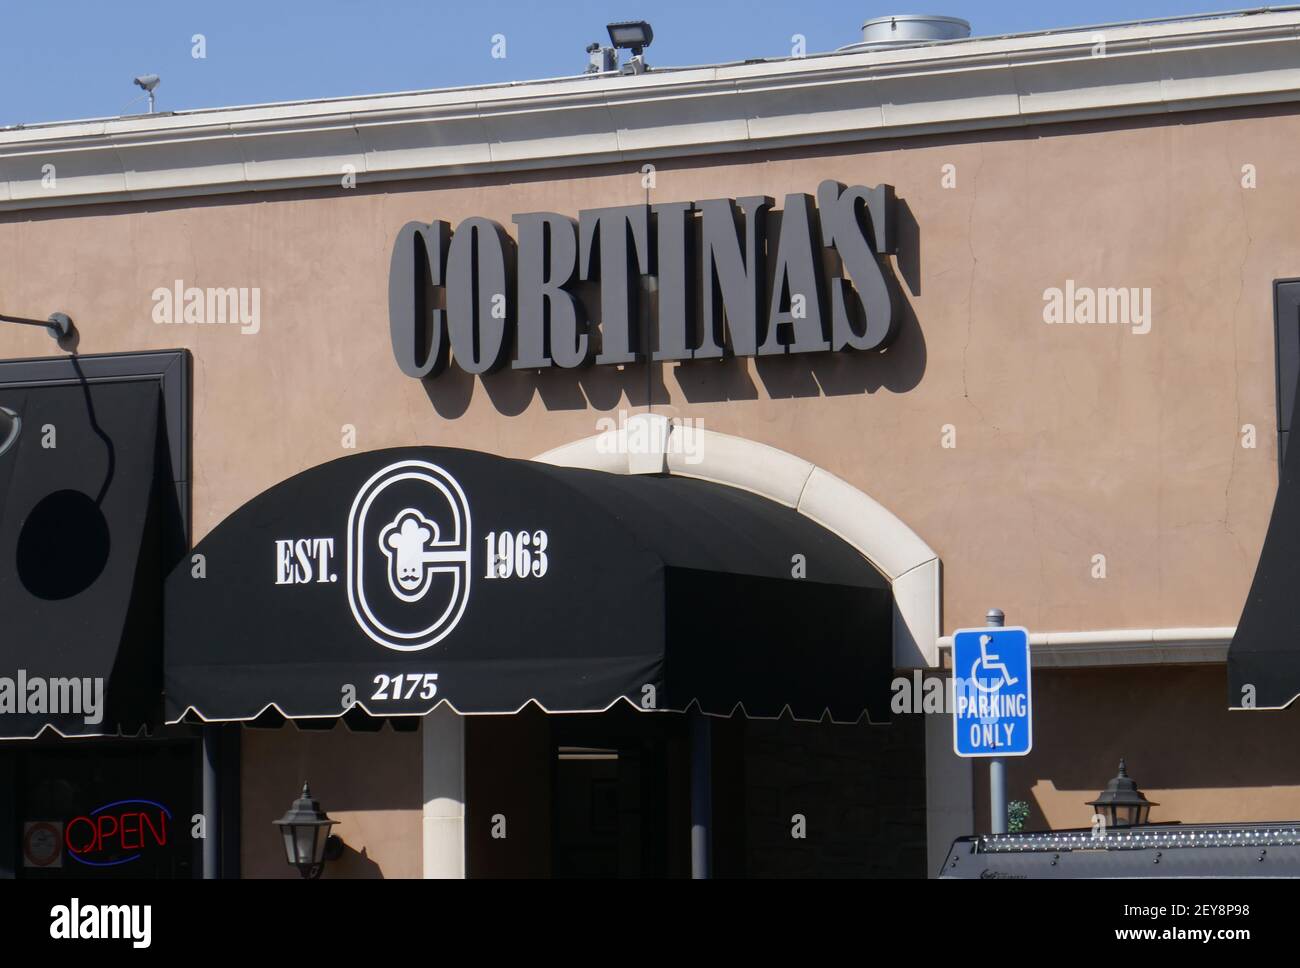 Anaheim, California, USA 4th March 2021 A general view of atmosphere of Cortina's Italian Market & Pizzeria, a favorite of singer Gwen Stefani at 2175 W. Prange Avenue on March 4, 2021 in Anaheim, California, USA. Photo by Barry King/Alamy Stock Photo Stock Photo